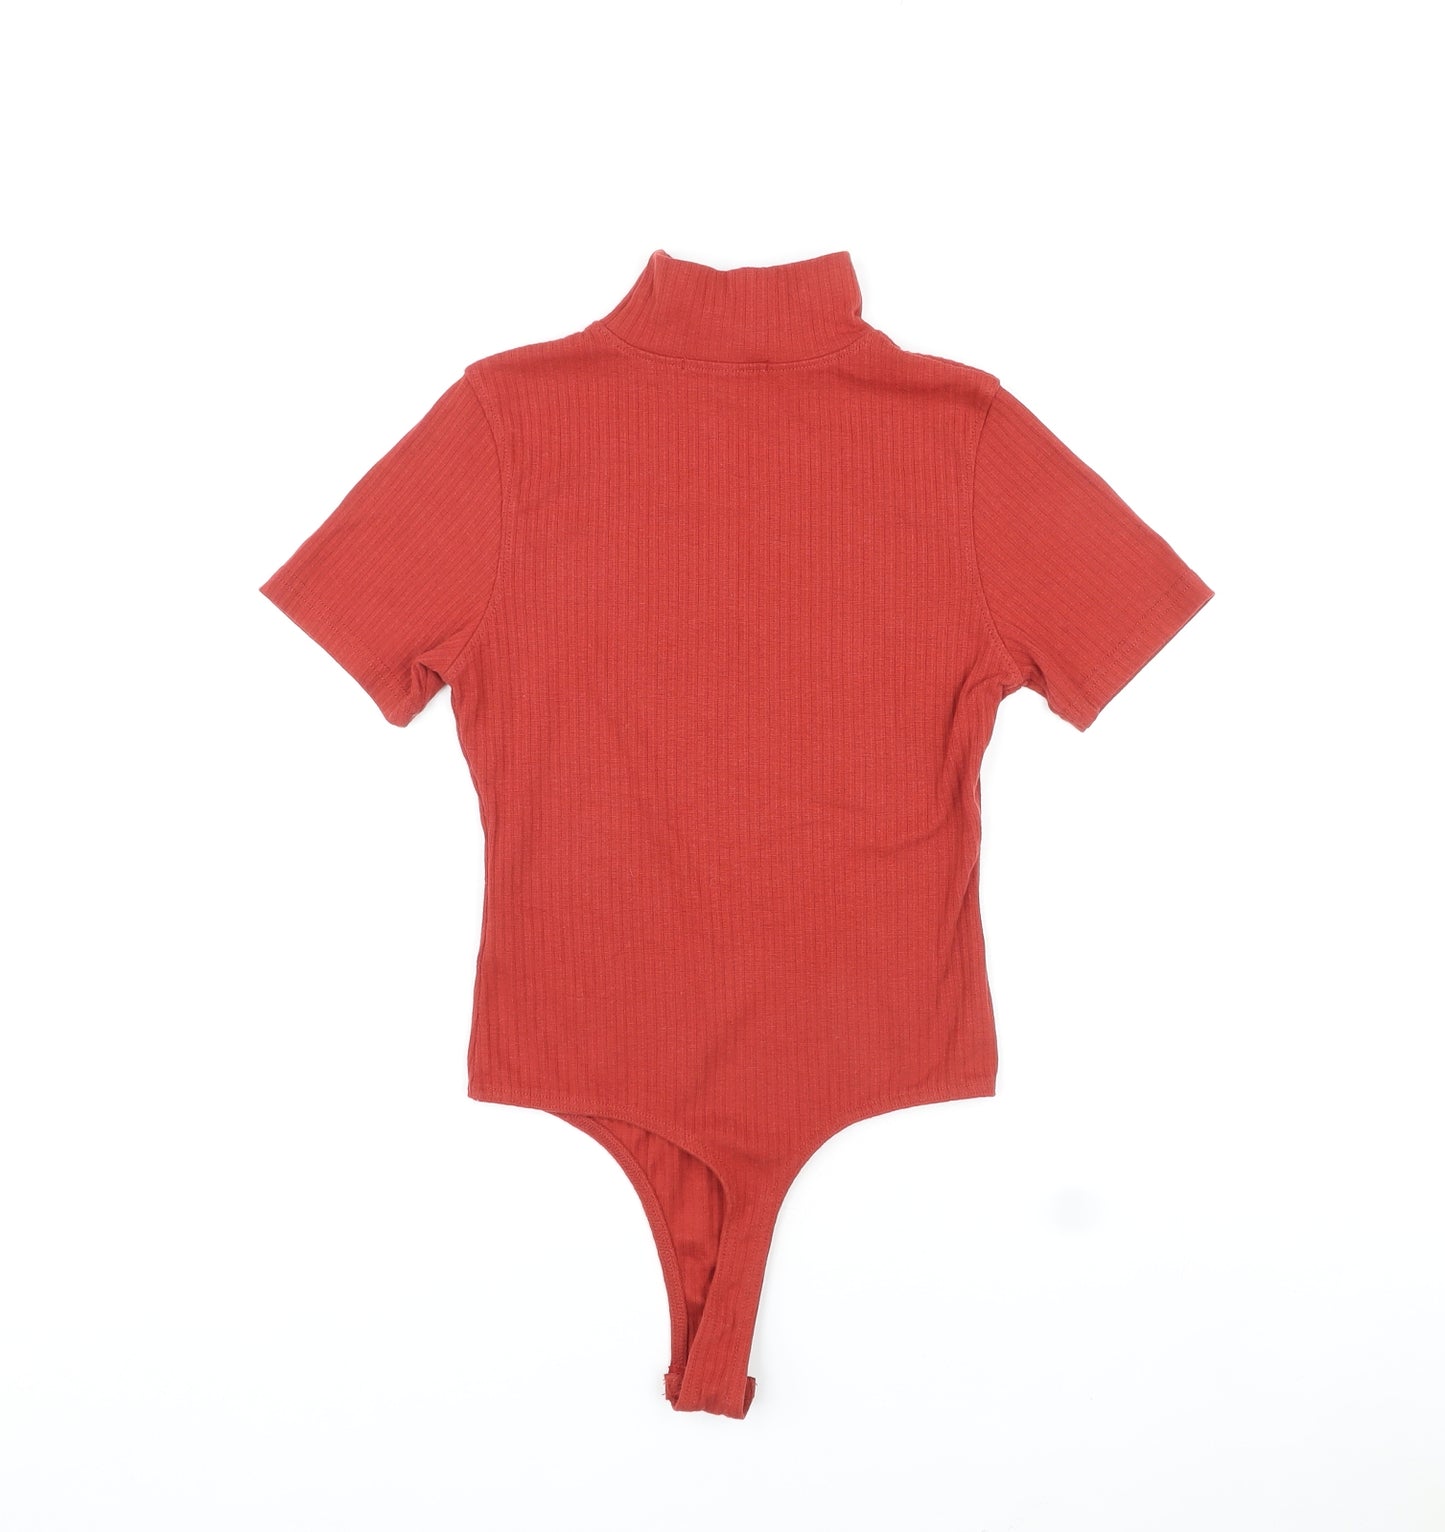 Missguided Womens Red Polyester Bodysuit One-Piece Size 8 Snap